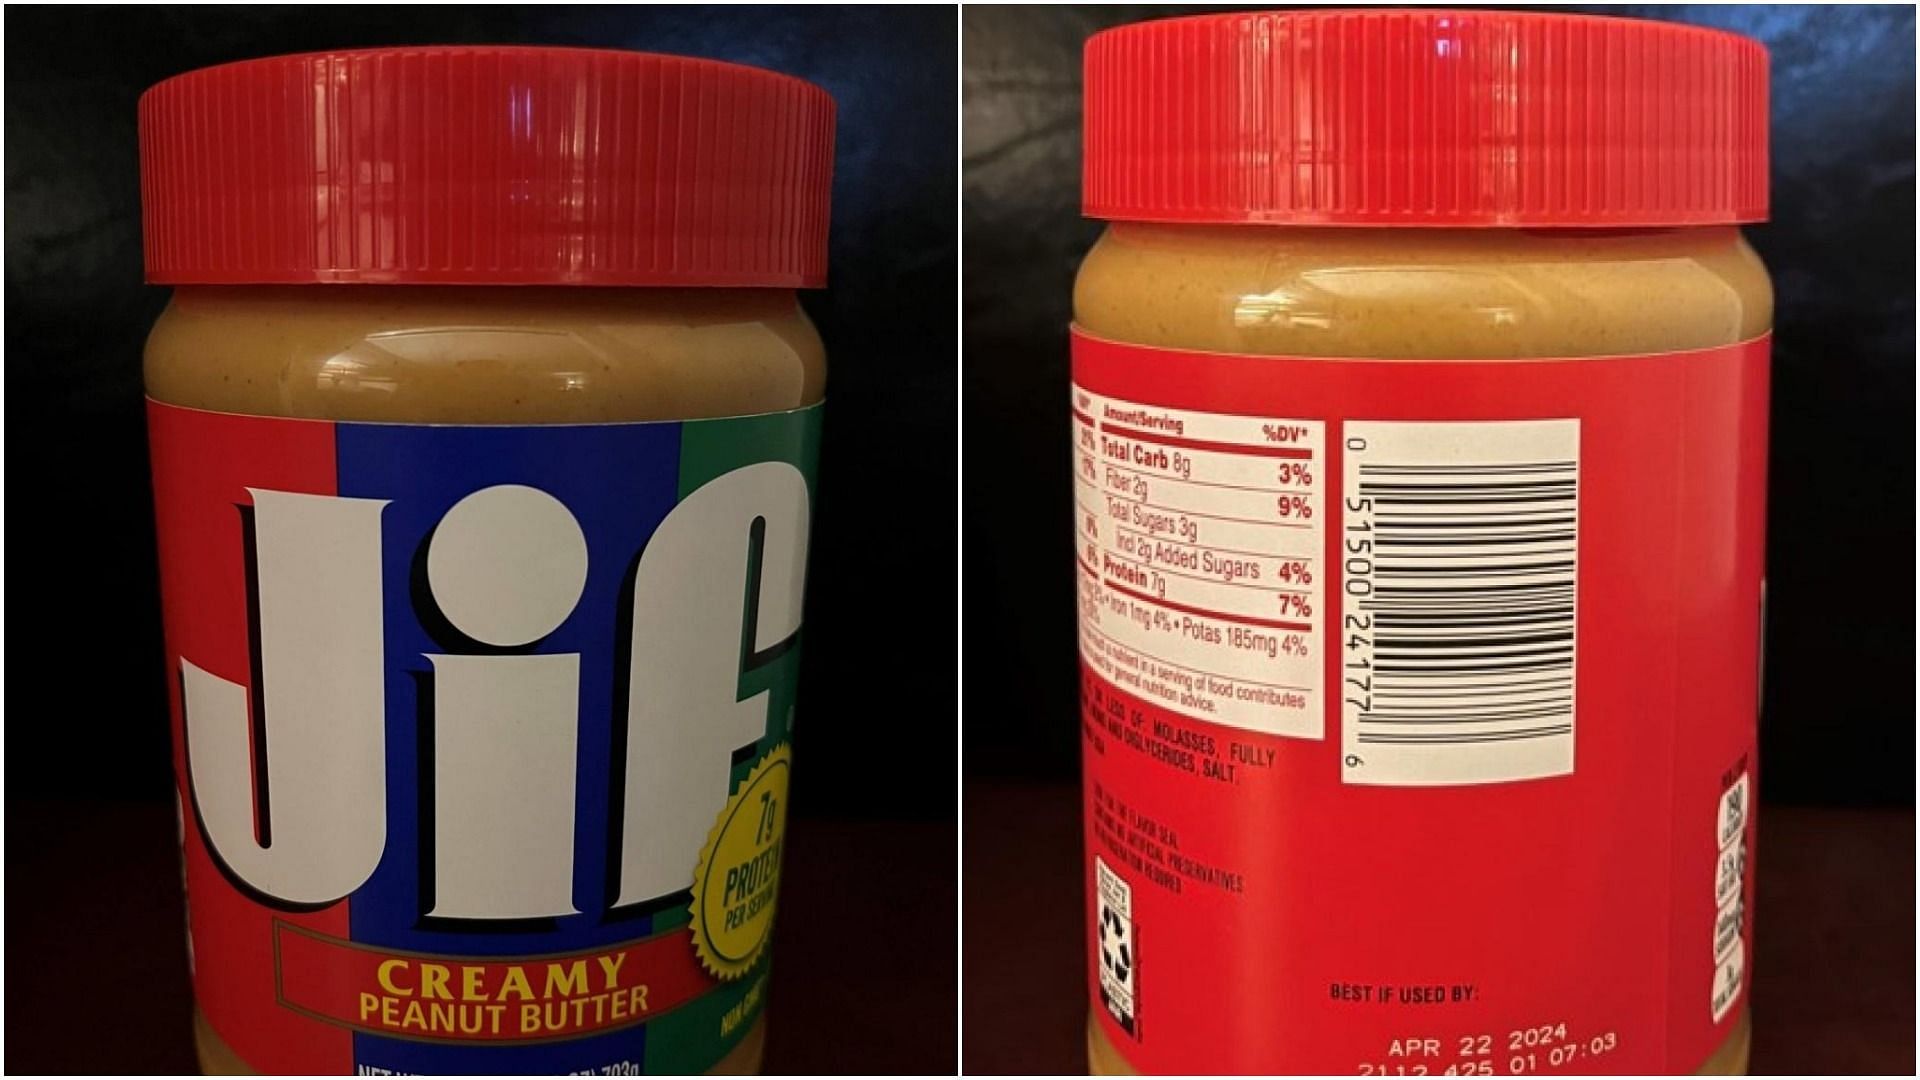 Jif Peanut Butter recalled (Image via FDA and The J. M. Smucker Co.)